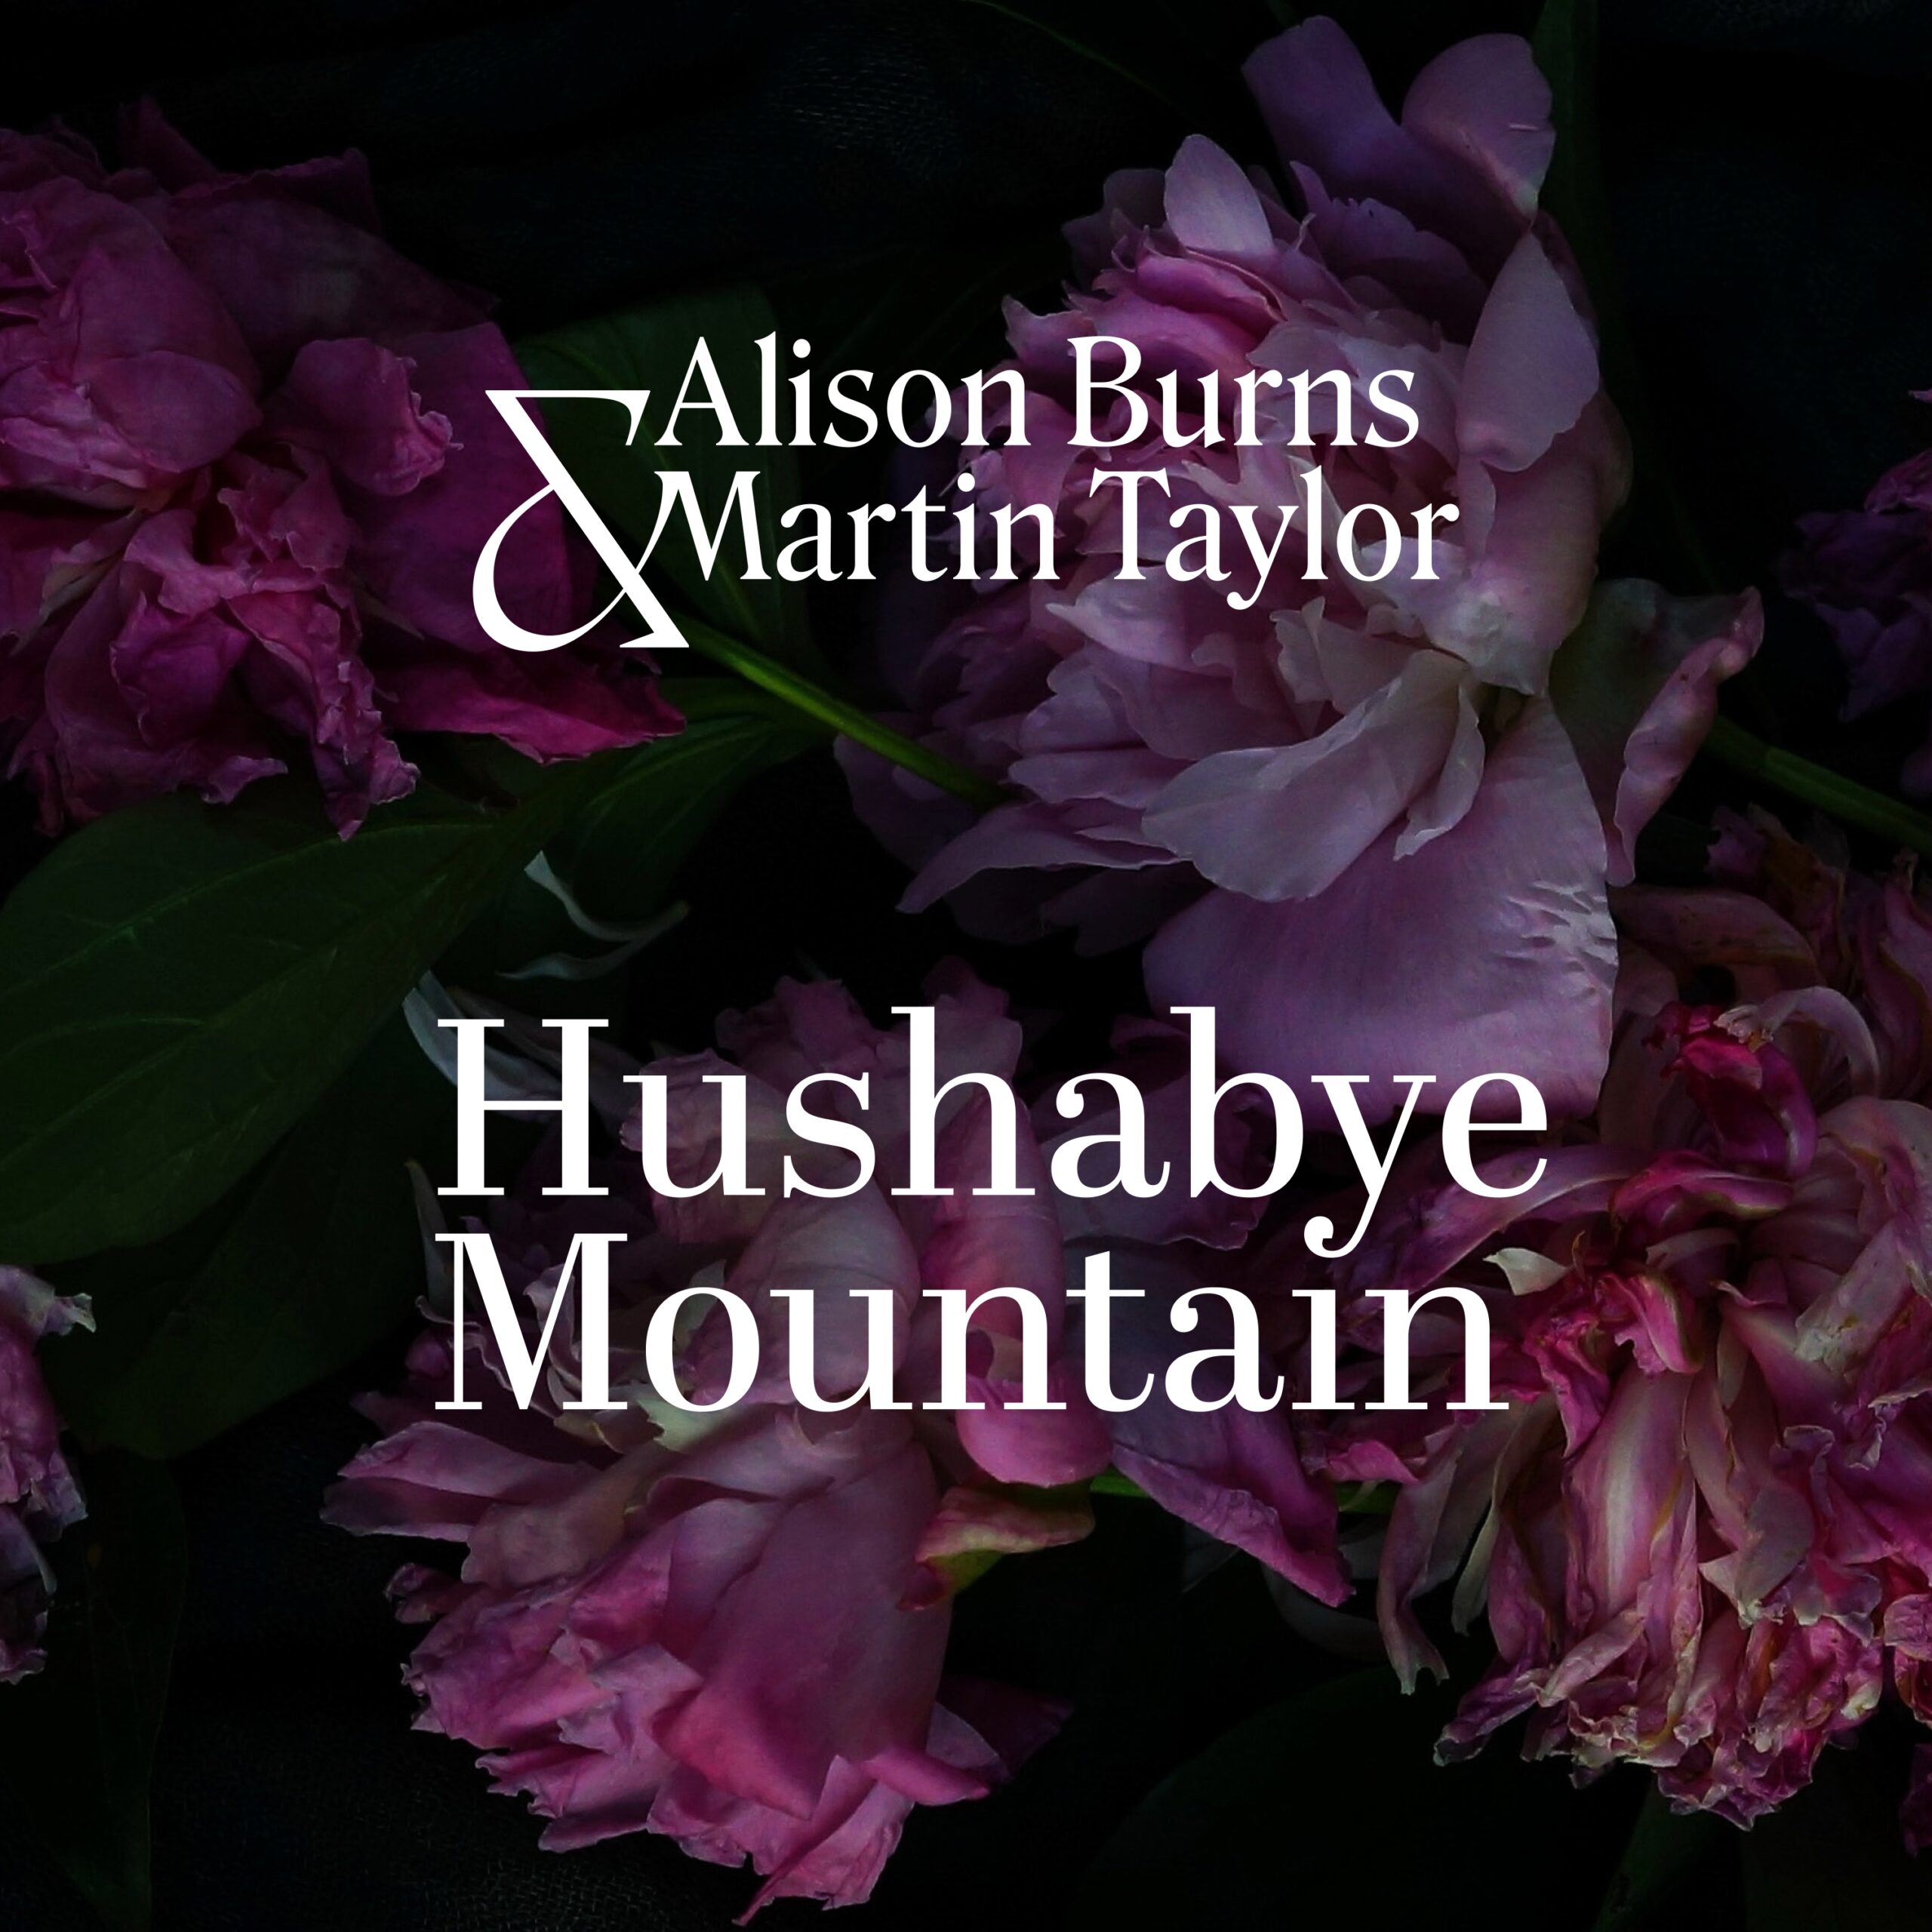 Hushabye Mountain by Alison Burns and Martin Taylor